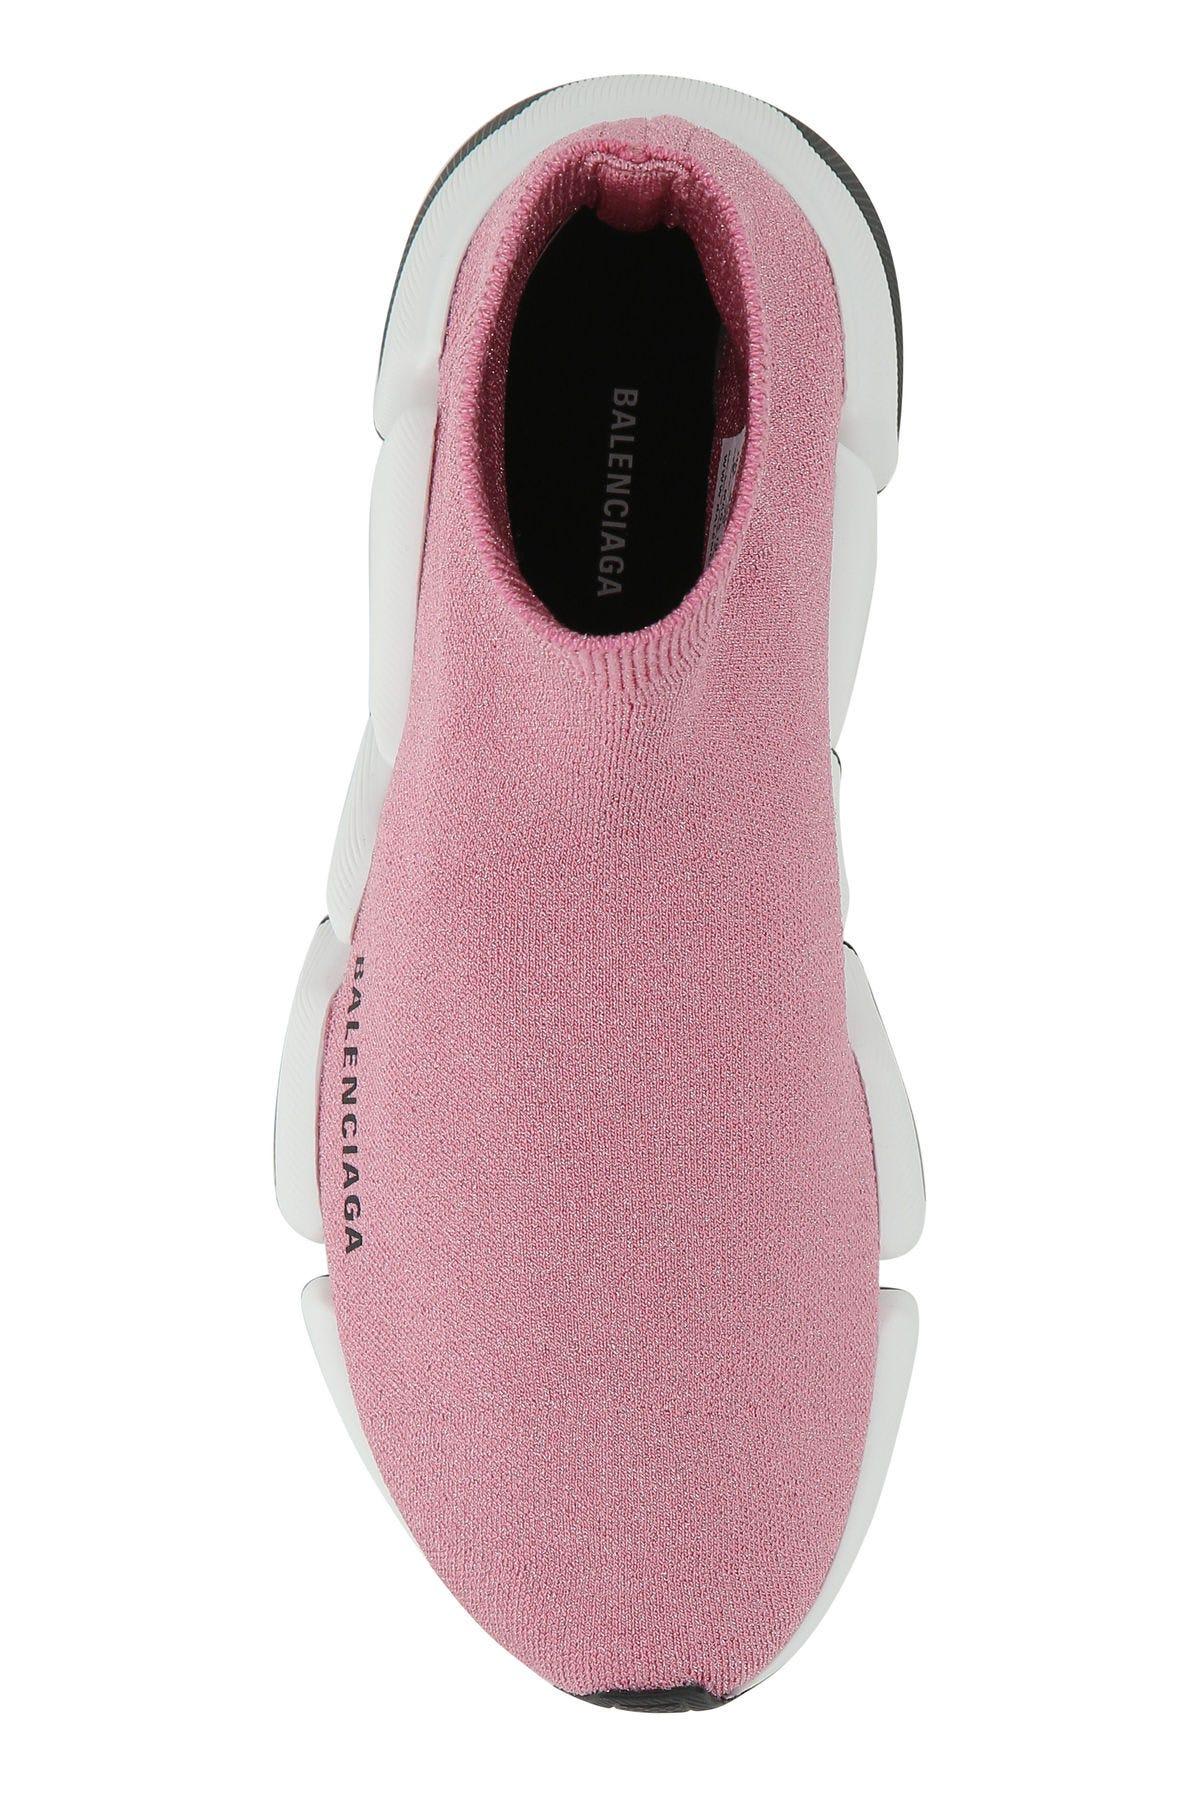 BALENCIAGA Pink Speed 2.0 Sneakers Size 35 – Dress with Annick